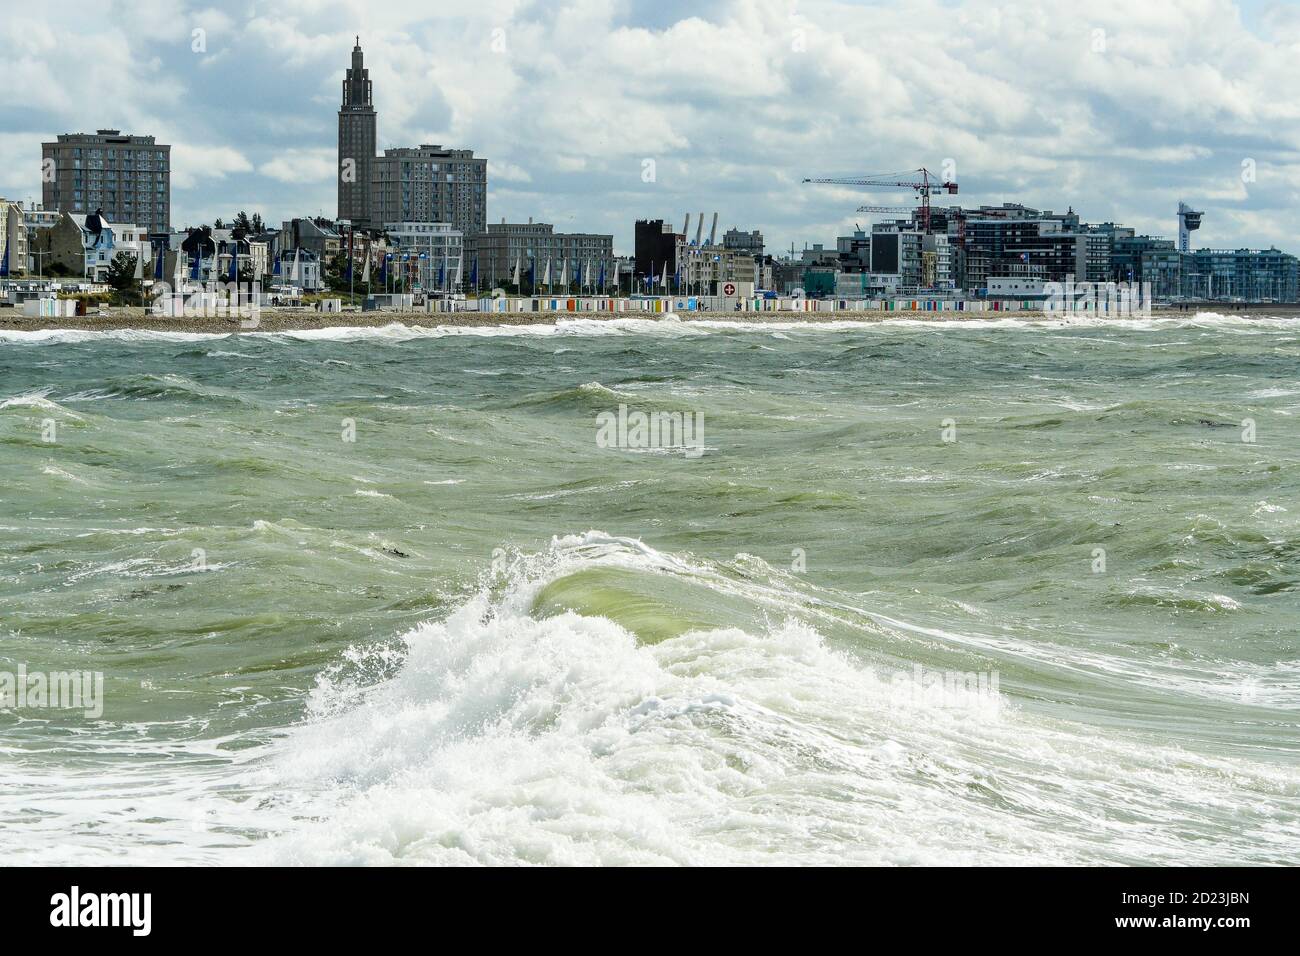 Le Havre beach and seaside promenade seen on a stormy day, Le Havre, Seine-Maritime, Normandy Region, France Stock Photo